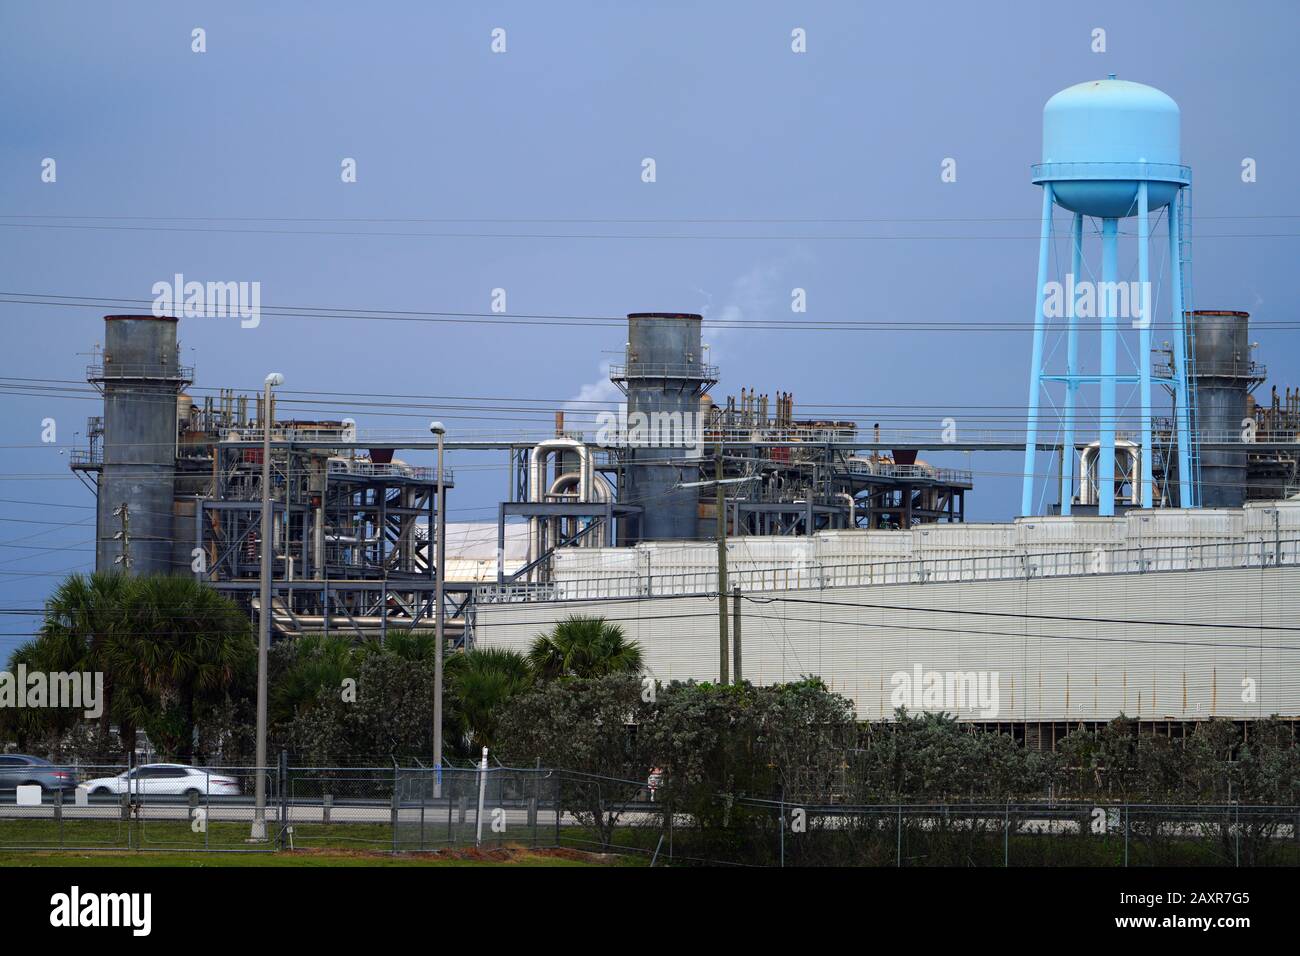 FORT MYERS, FL -30 JAN 2020- View of the Florida Power and Light power  plant near the Manatee Park in Fort Myers, Lee County, Florida, United  States Stock Photo - Alamy